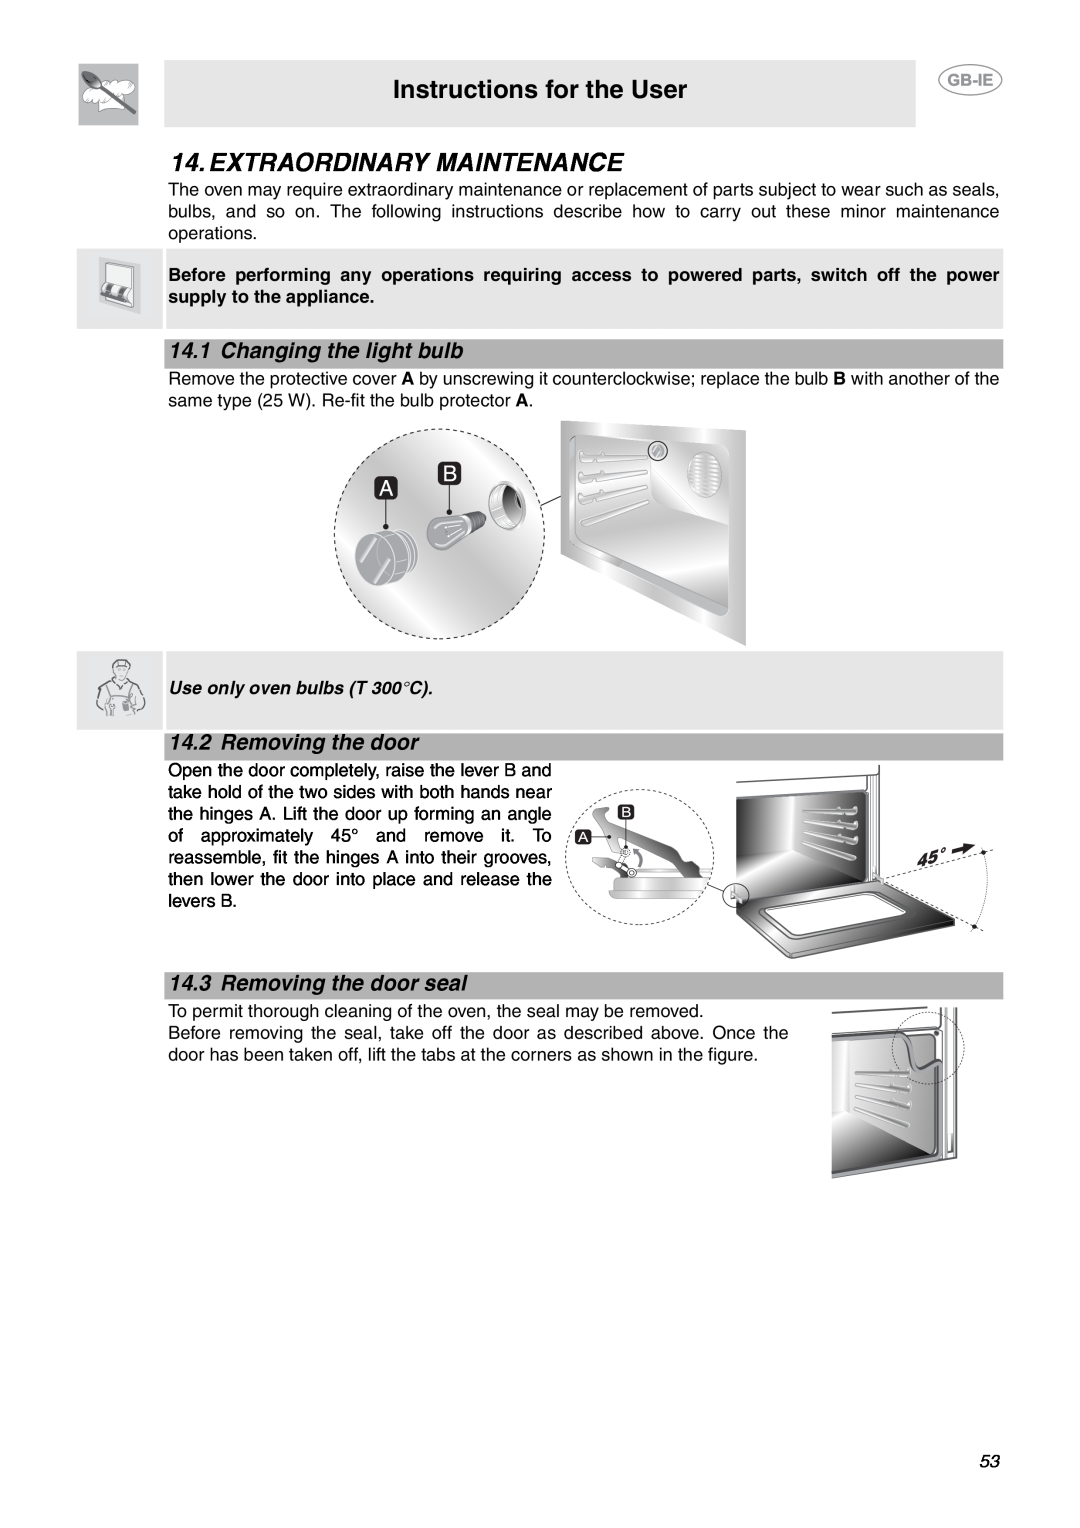 Smeg CE9IMX Extraordinary Maintenance, Changing the light bulb, Removing the door seal, Instructions for the User 